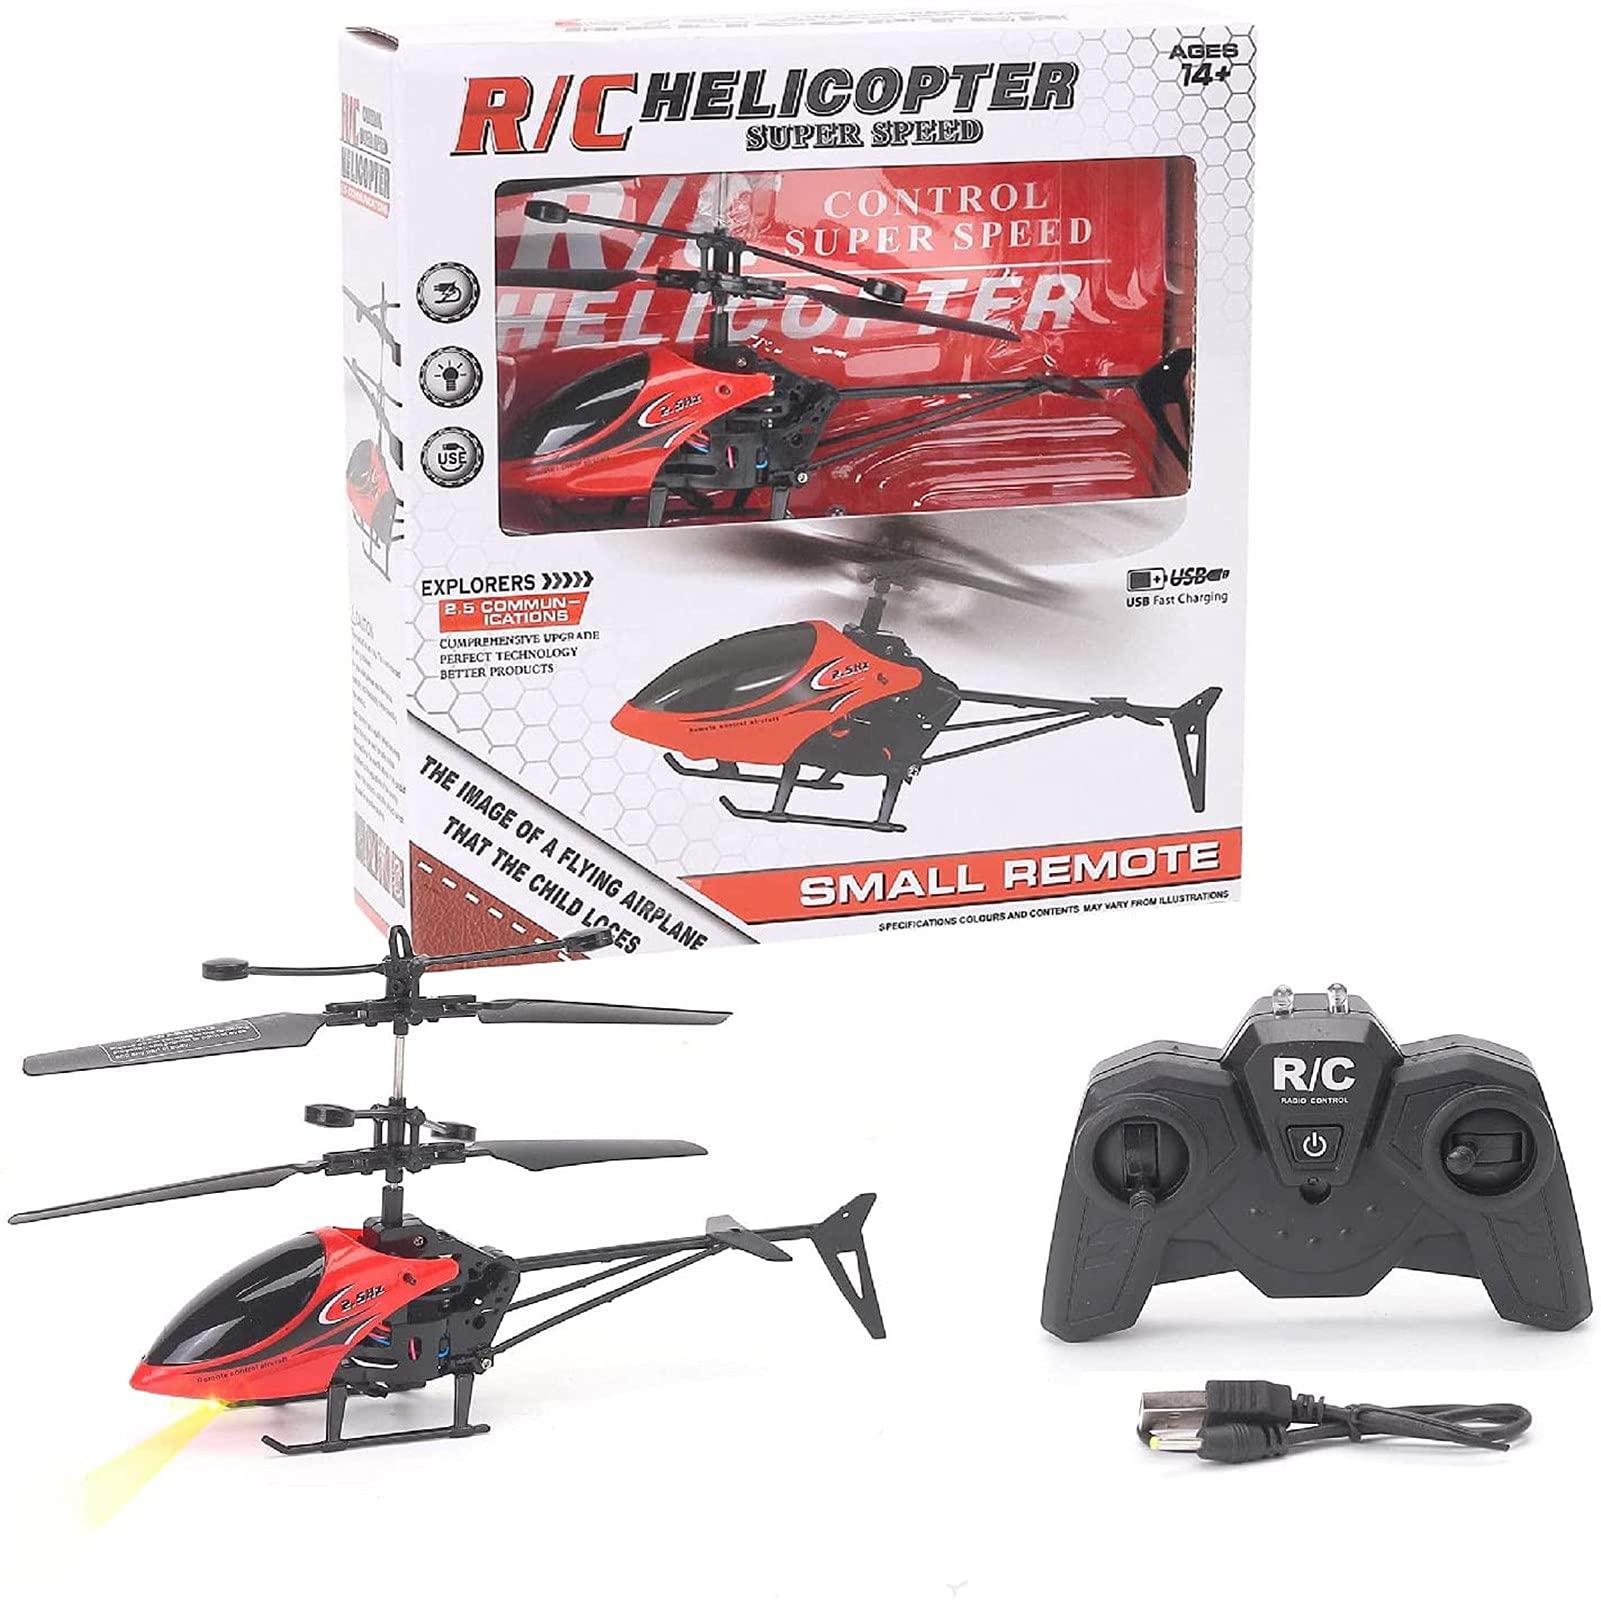 Remote Control Helicopter Offer: Considerations for a perfect remote control helicopter offer.